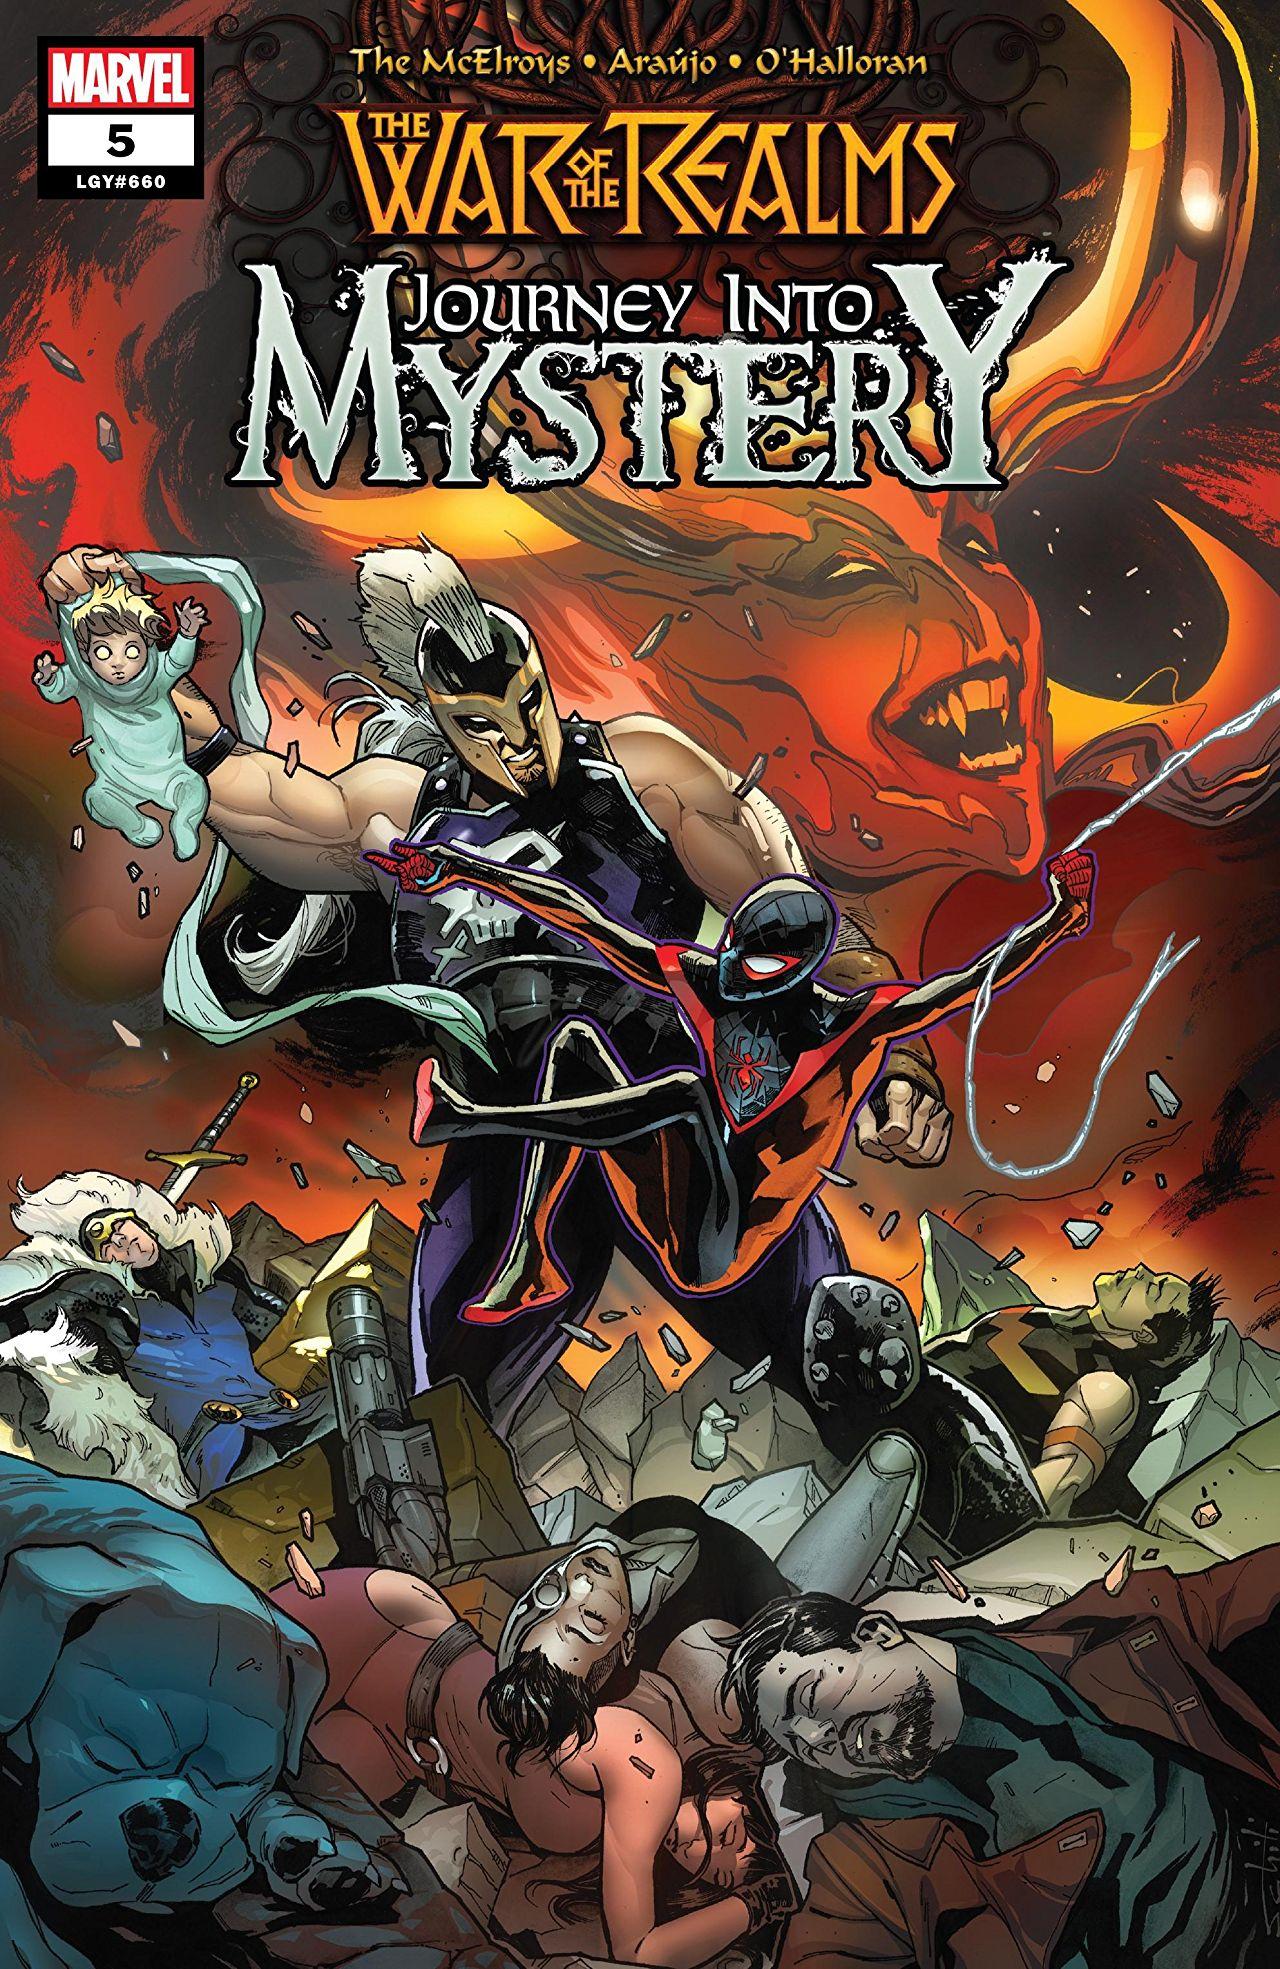 War of the Realms: Journey into Mystery Vol. 1 #5